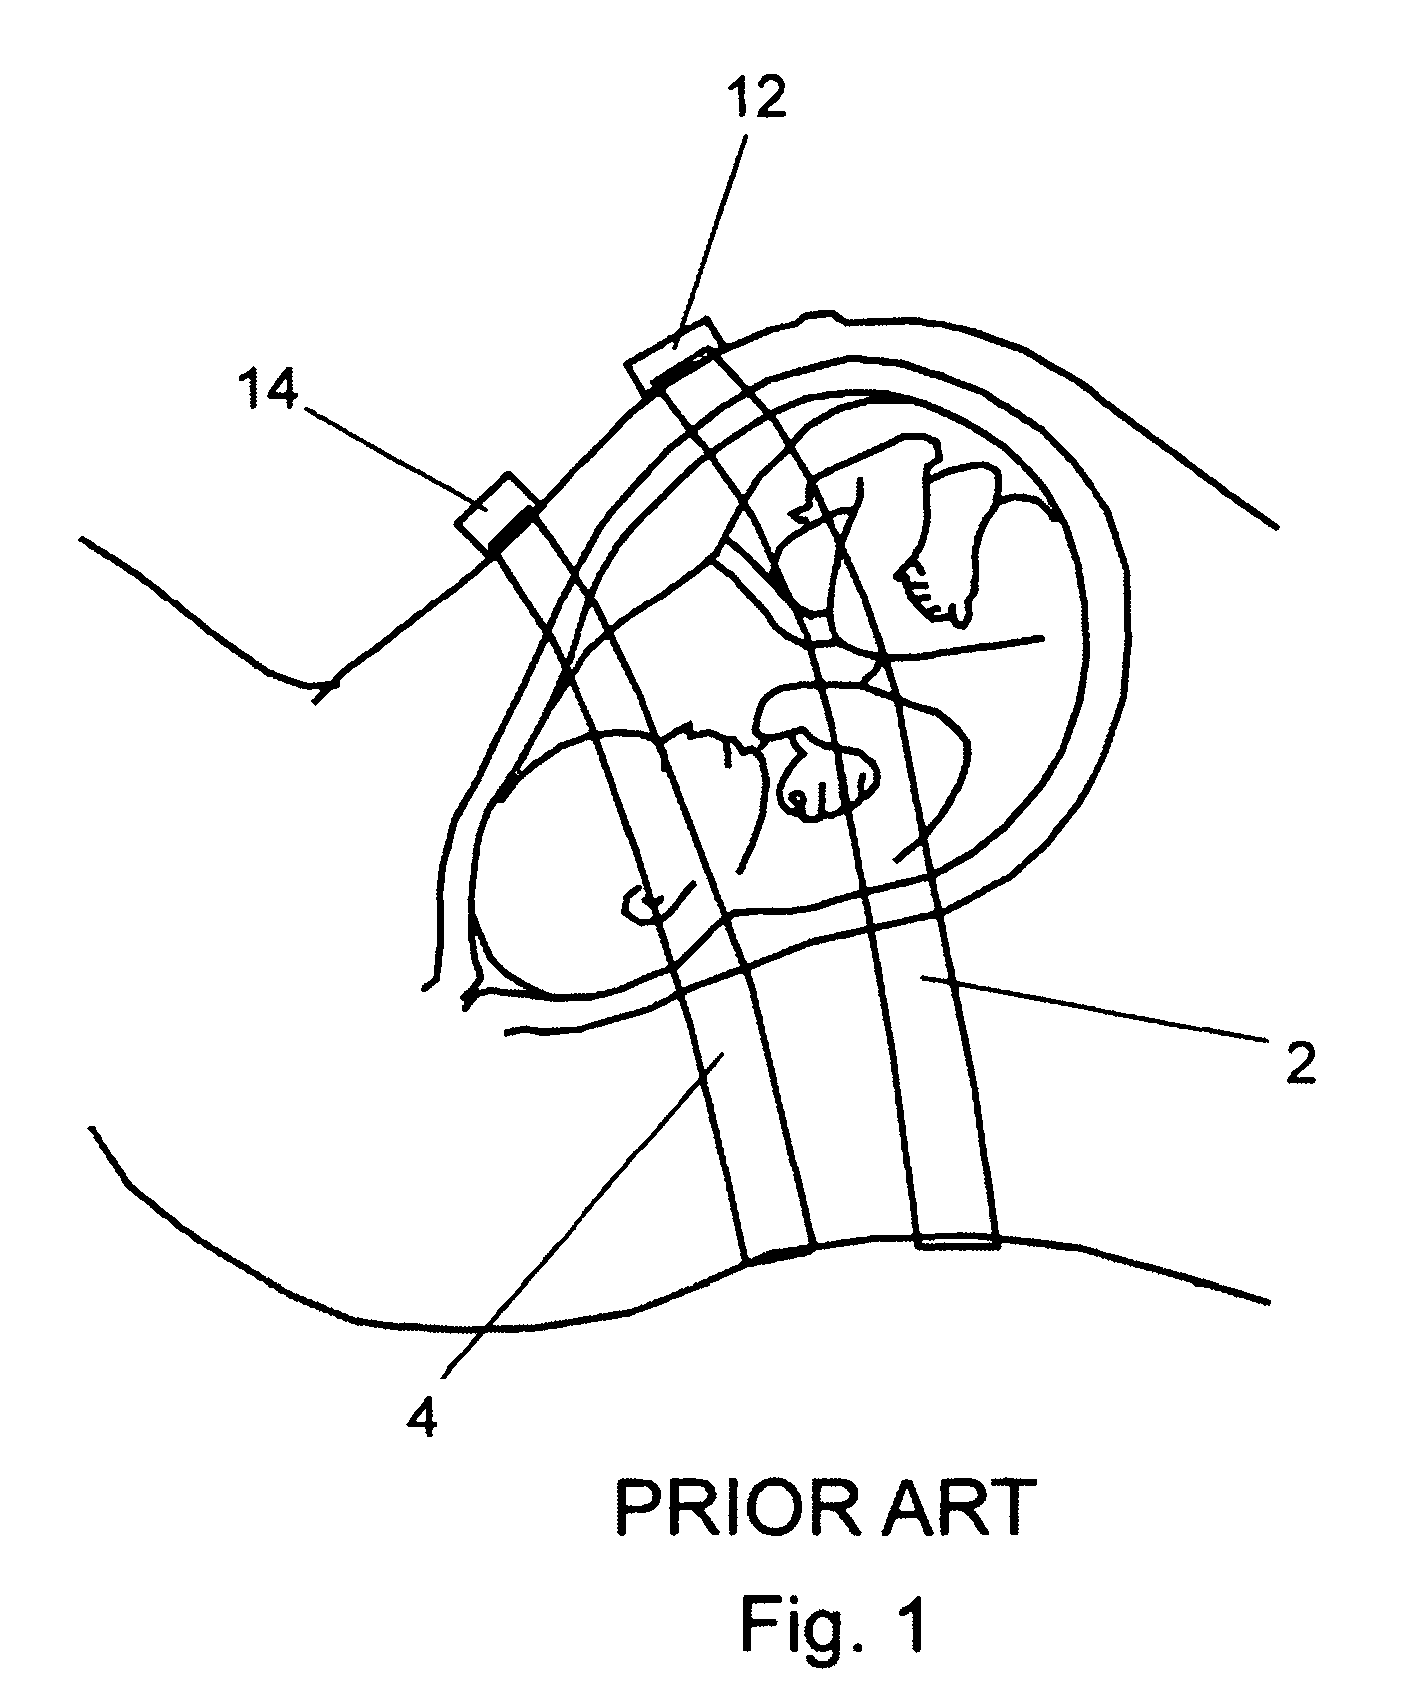 System, method, and kit for positioning a monitor transducer on a patient